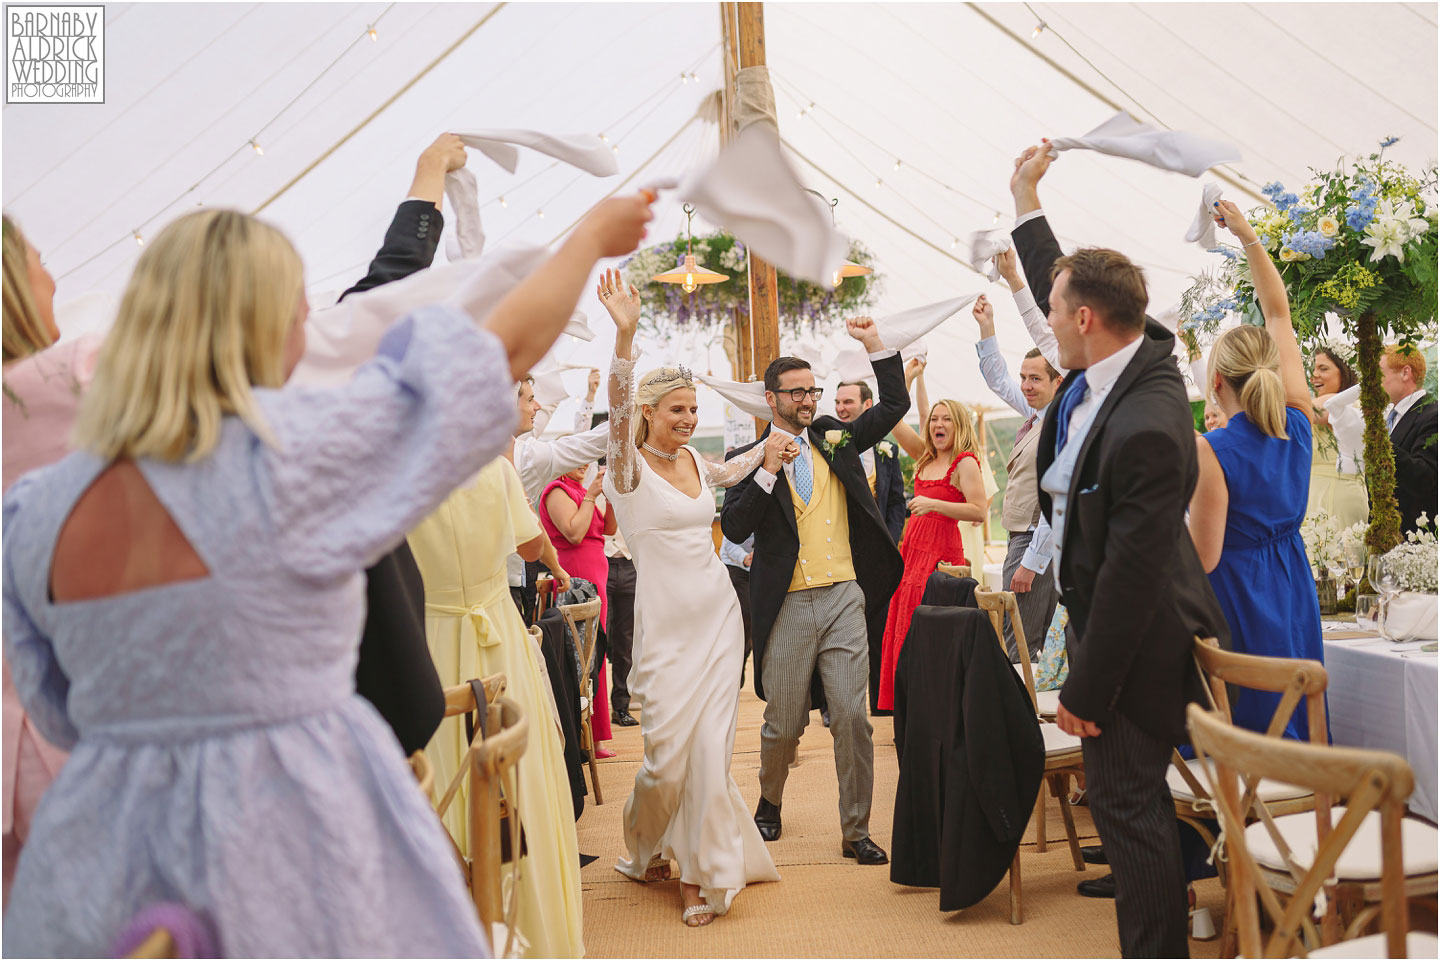 Candid photos of the entrance of the bride and groom at a wills marquee wedding by Yorkshire Wedding Photographer Barnaby Aldrick